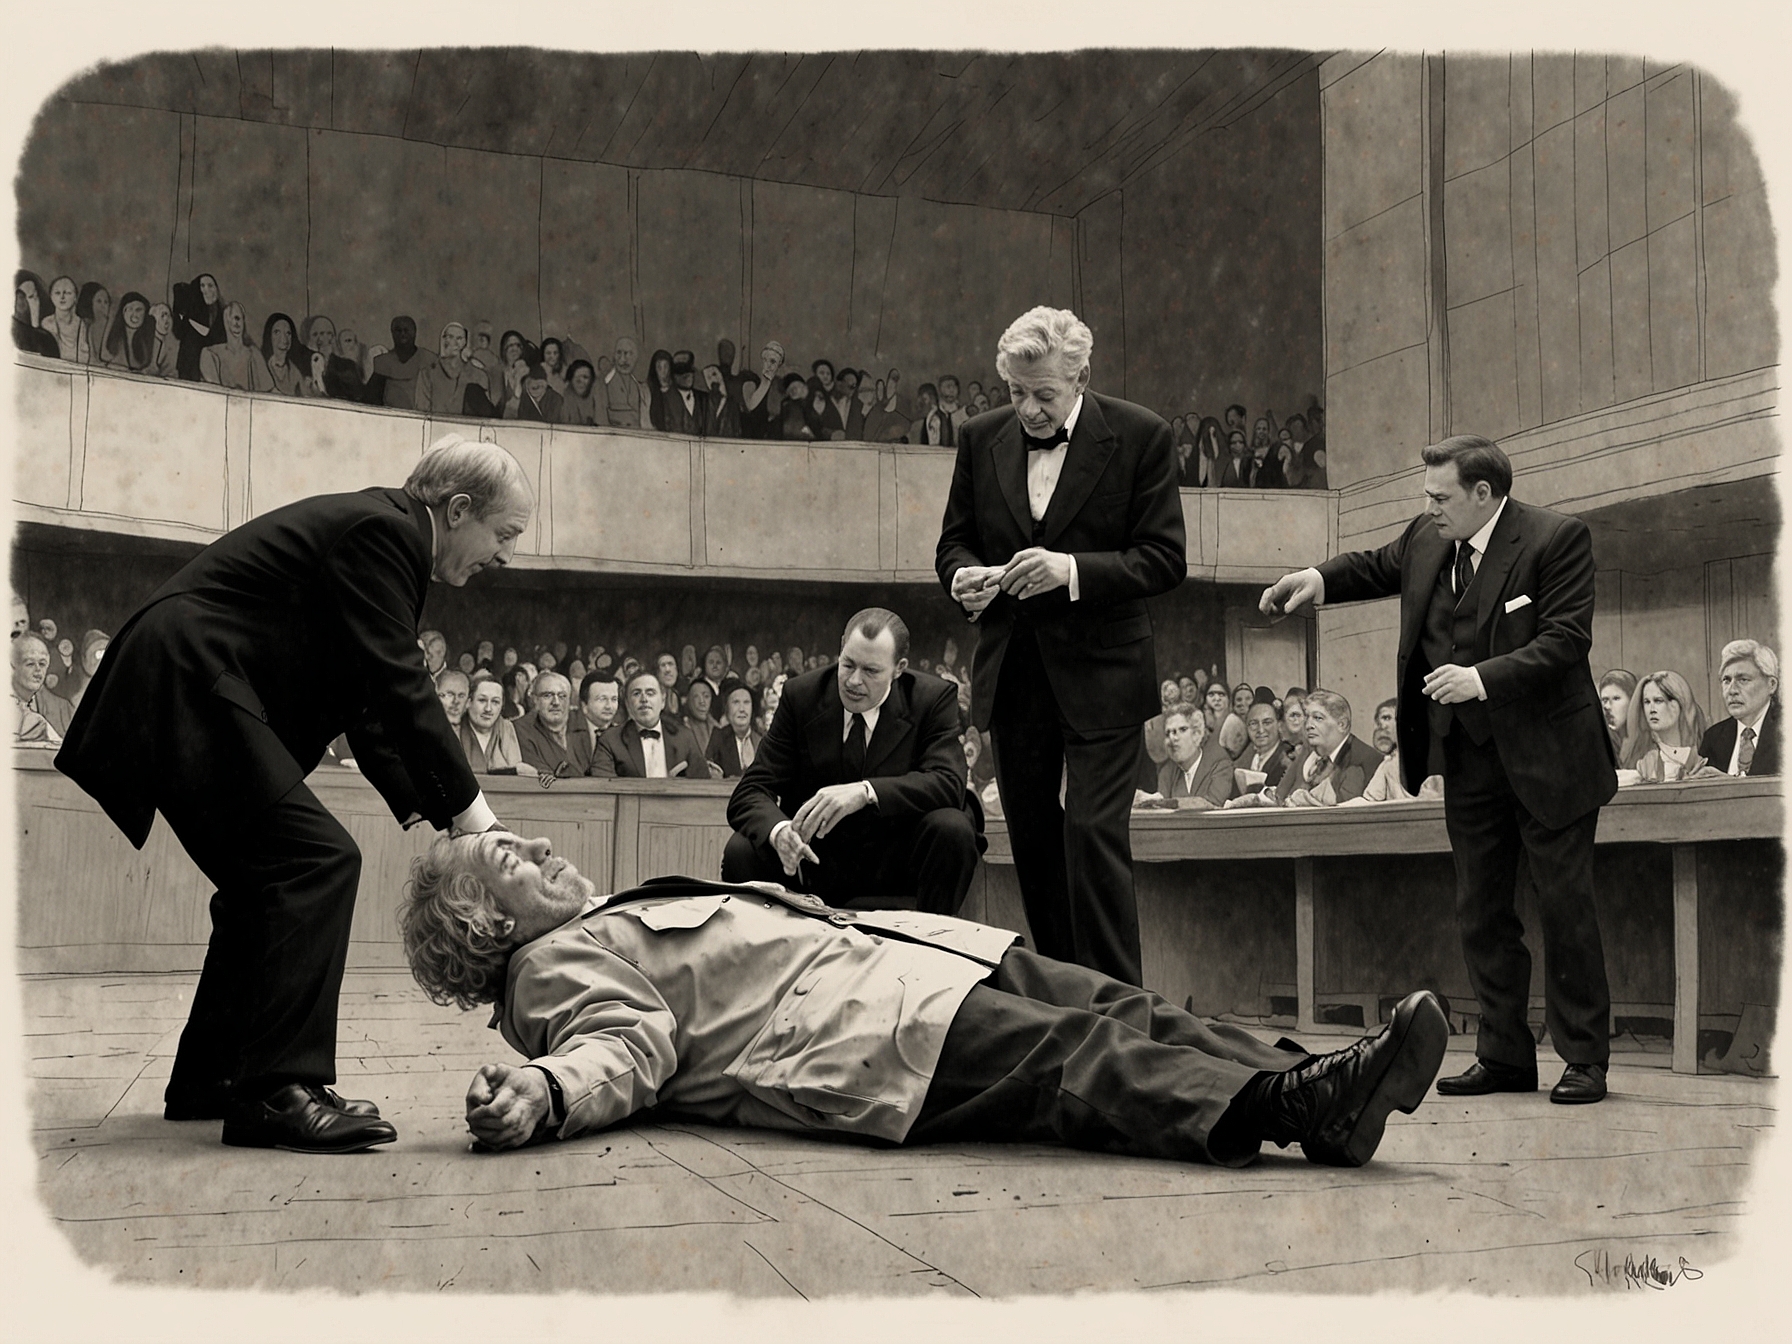 Sir Ian McKellen lying on the stage floor of the National Theatre with emergency medical personnel attending to him, capturing the immediate response following his fall during the 'Player Kings' performance.